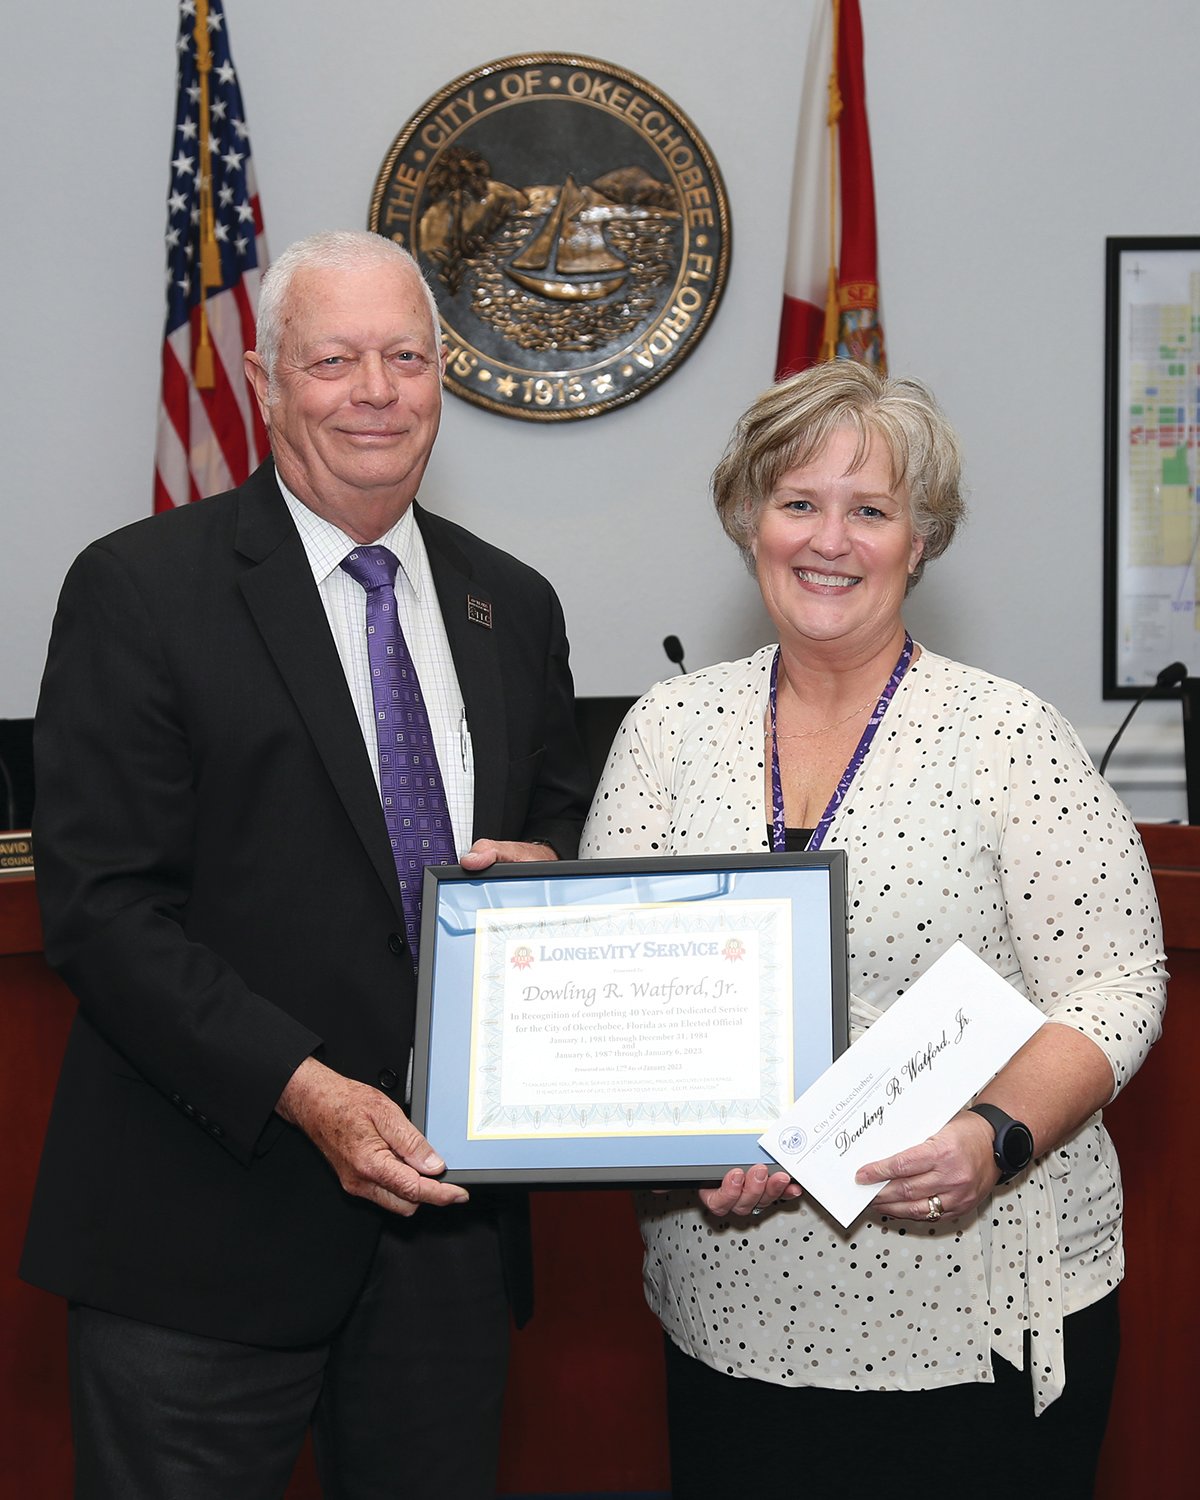 Mayor Dowling Watford is presented a certificate for 40 years of service to the city by City Clerk Lane Gamiotea.